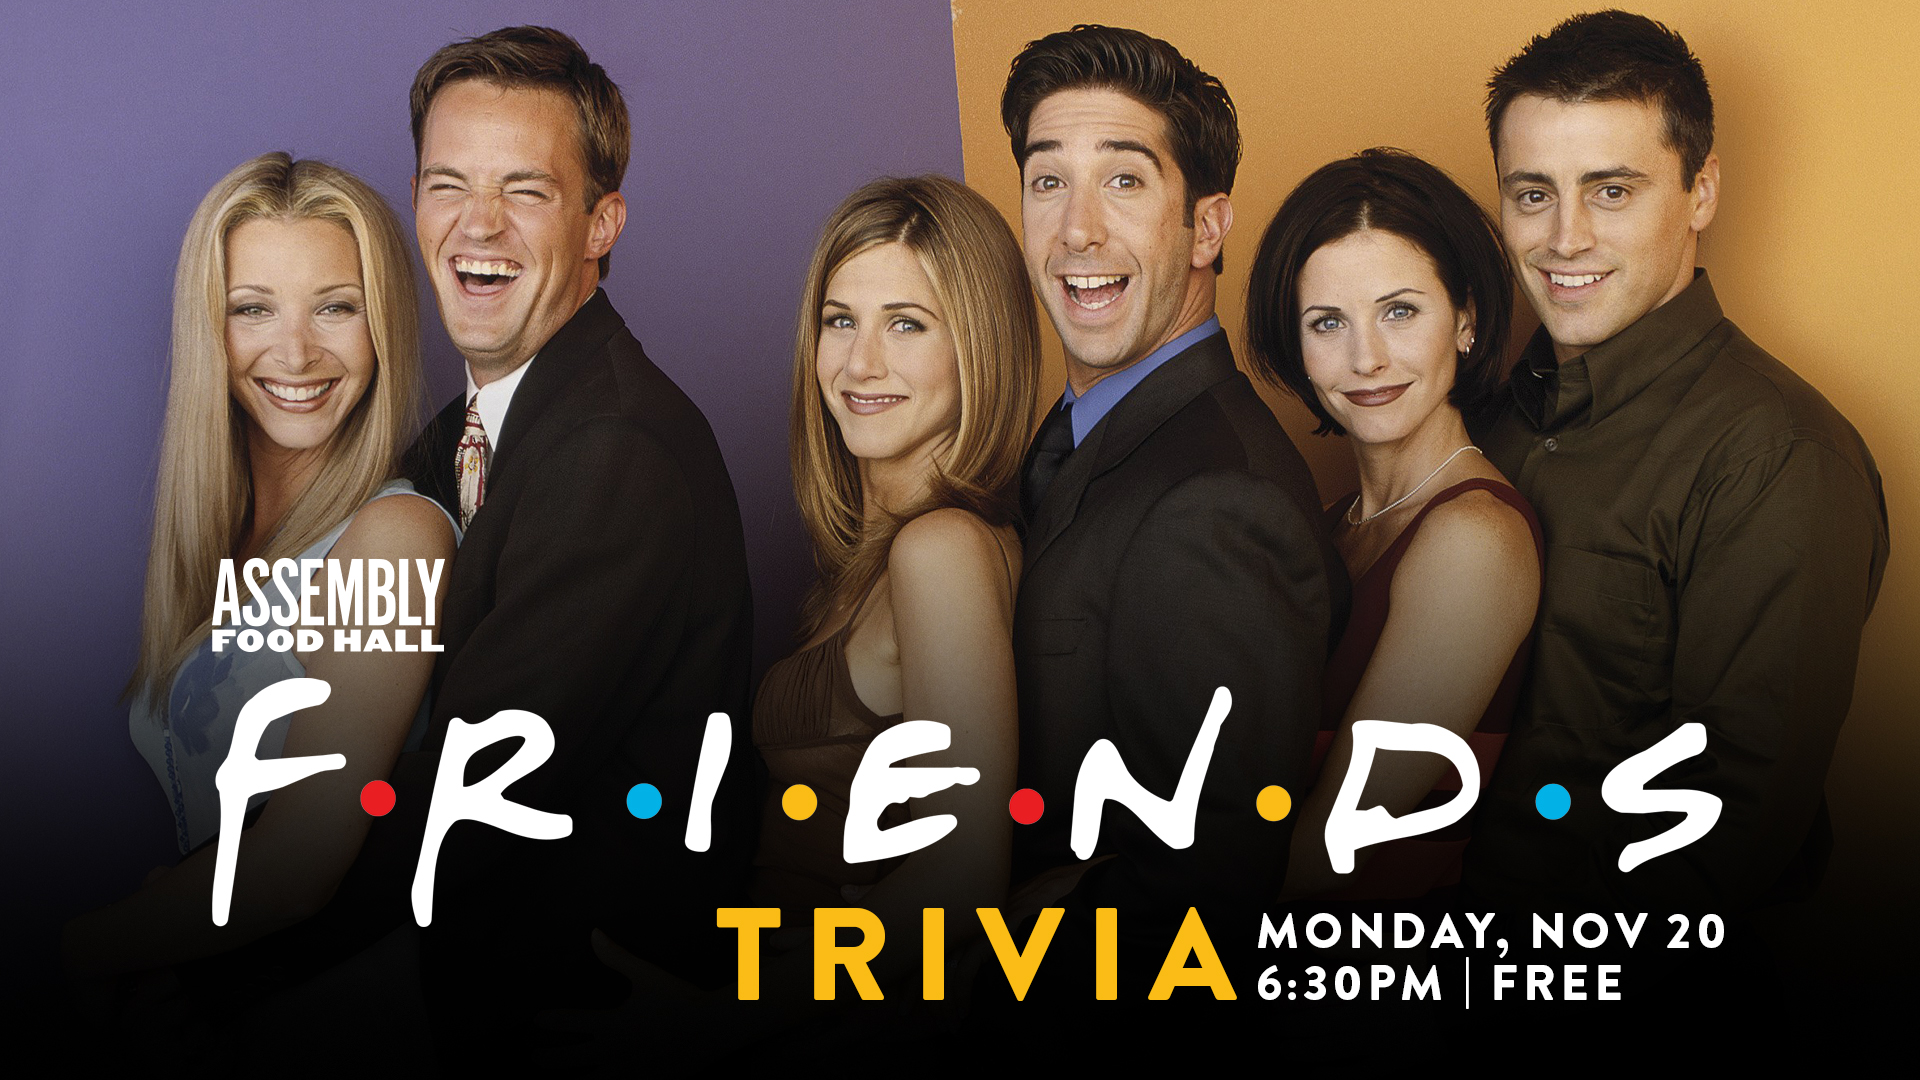 Promo image of Friends Trivia at Assembly Food Hall